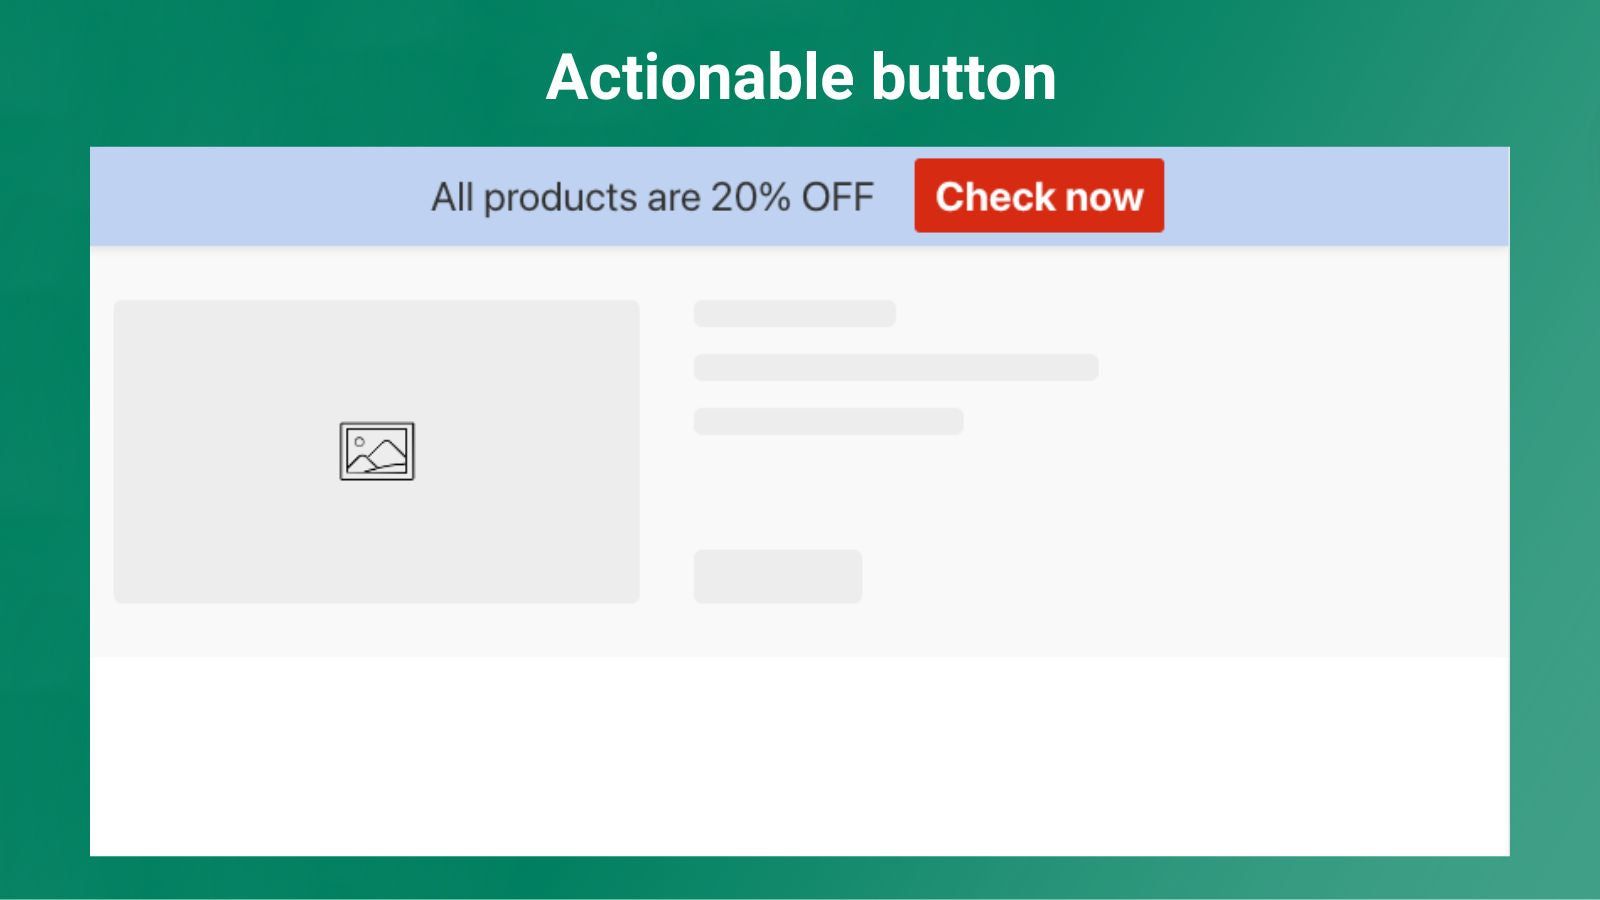 Actionable button